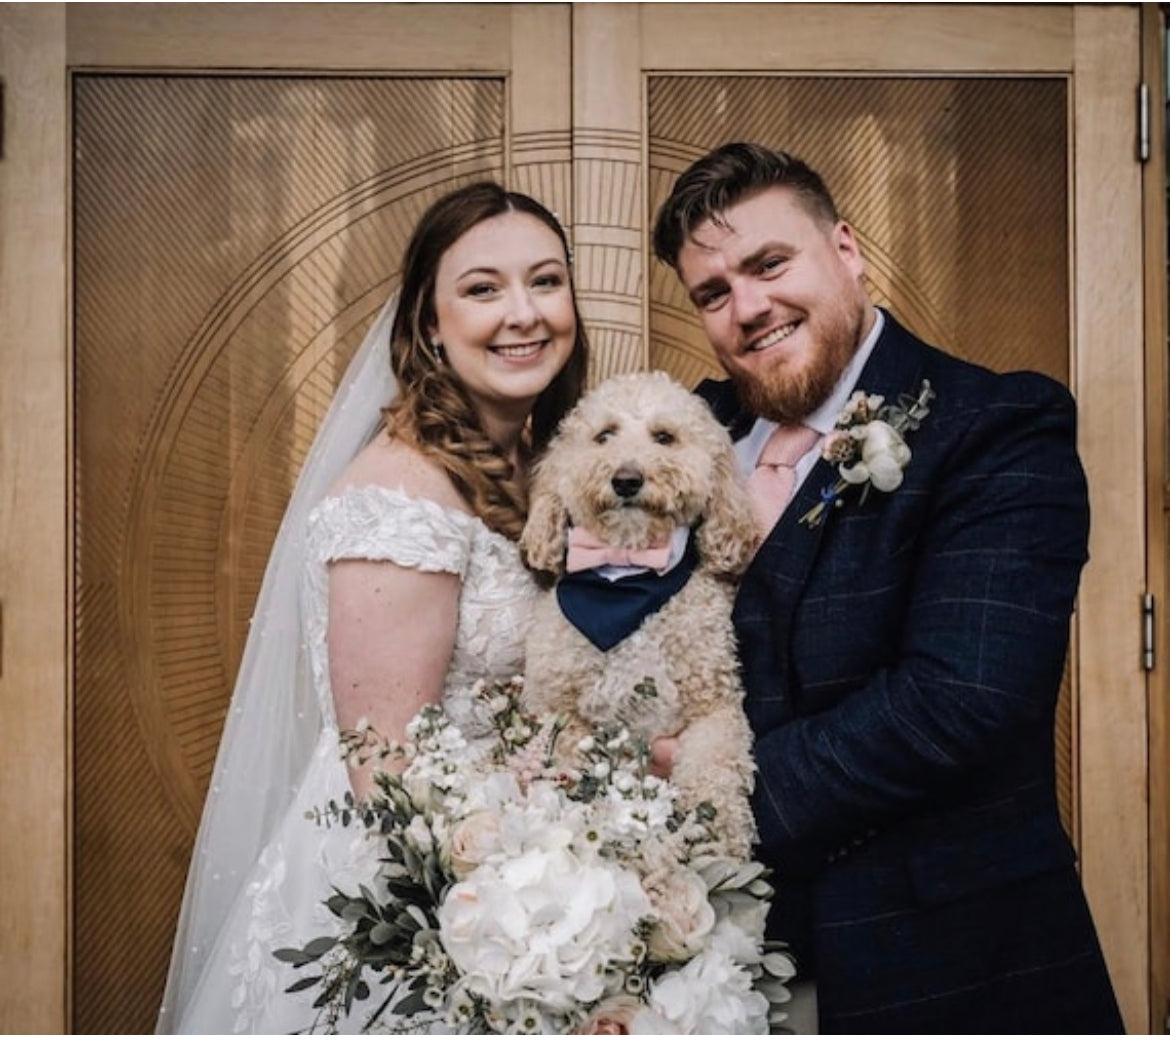 Wedding portrait family with a cute dog wearing a cute wedding outfit for dogs